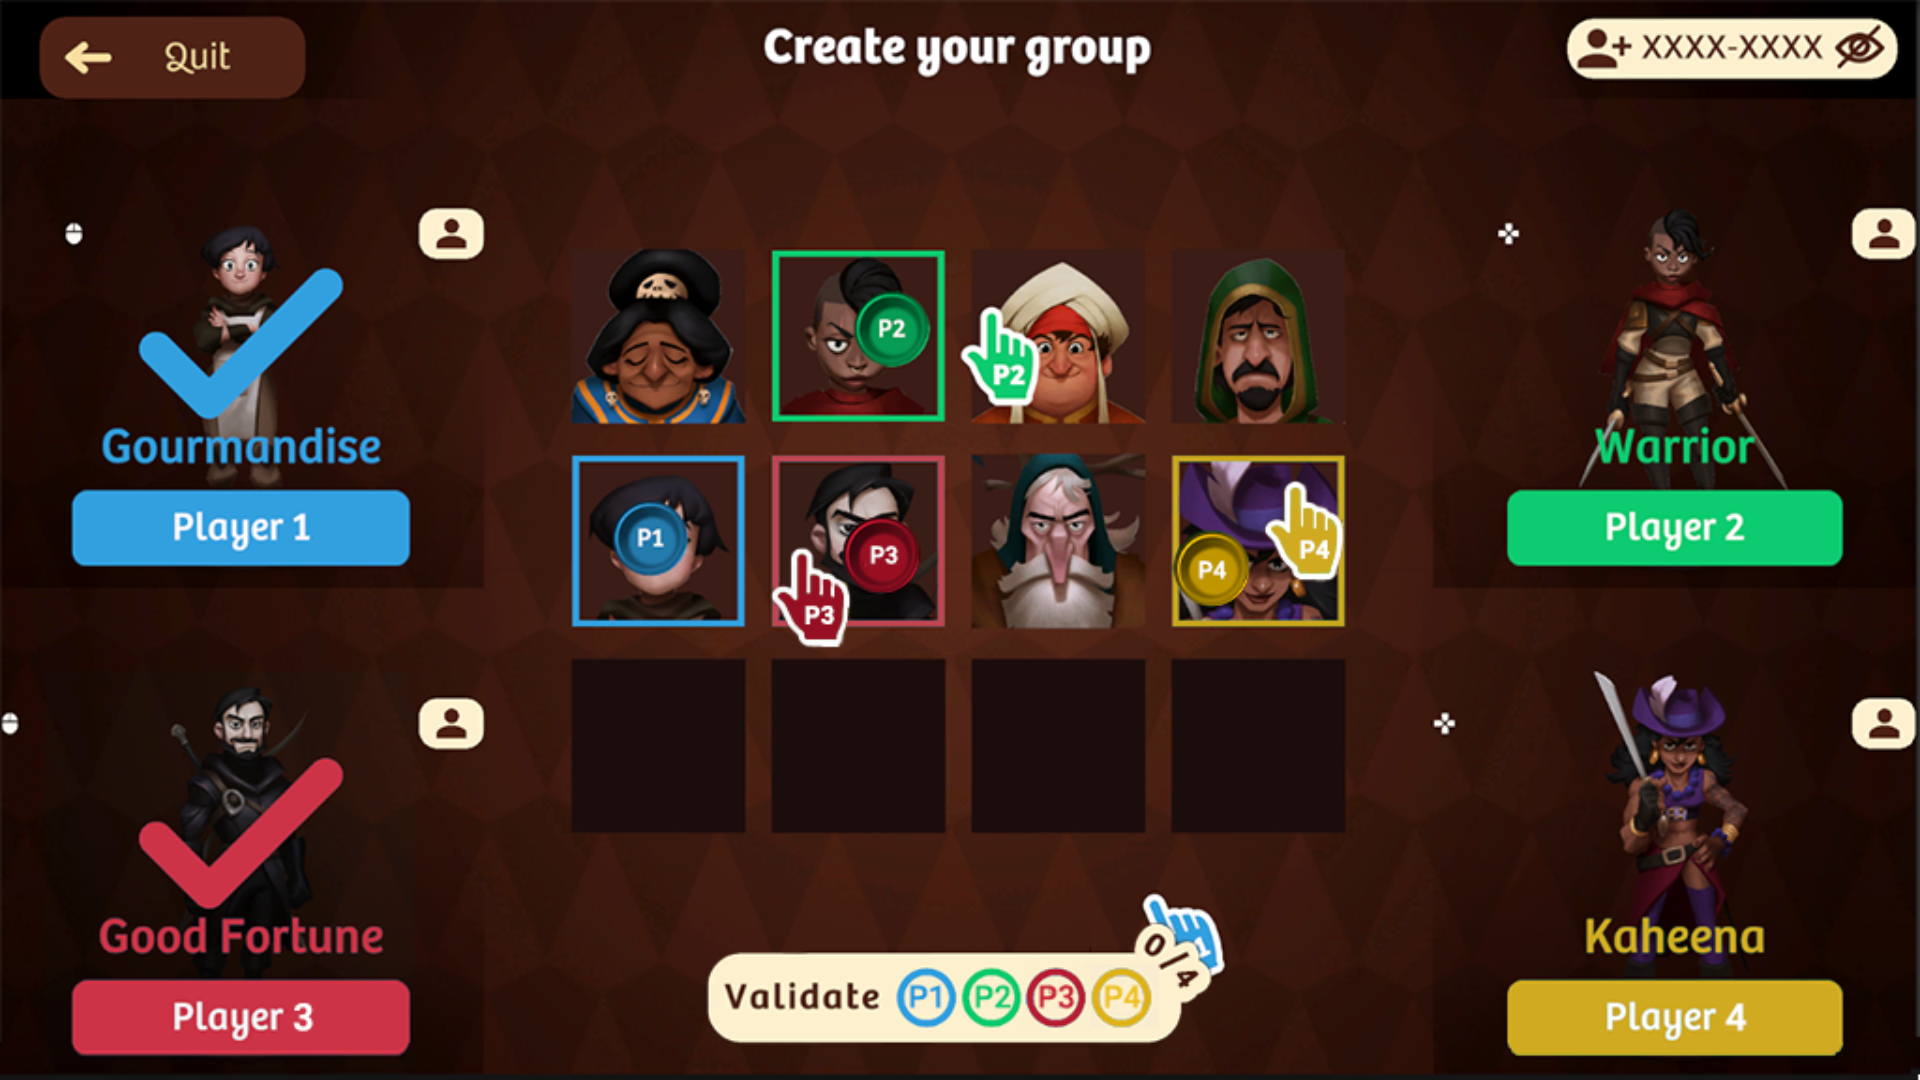 Screen of the menu, where you can choose the characters, according to their history and skills.